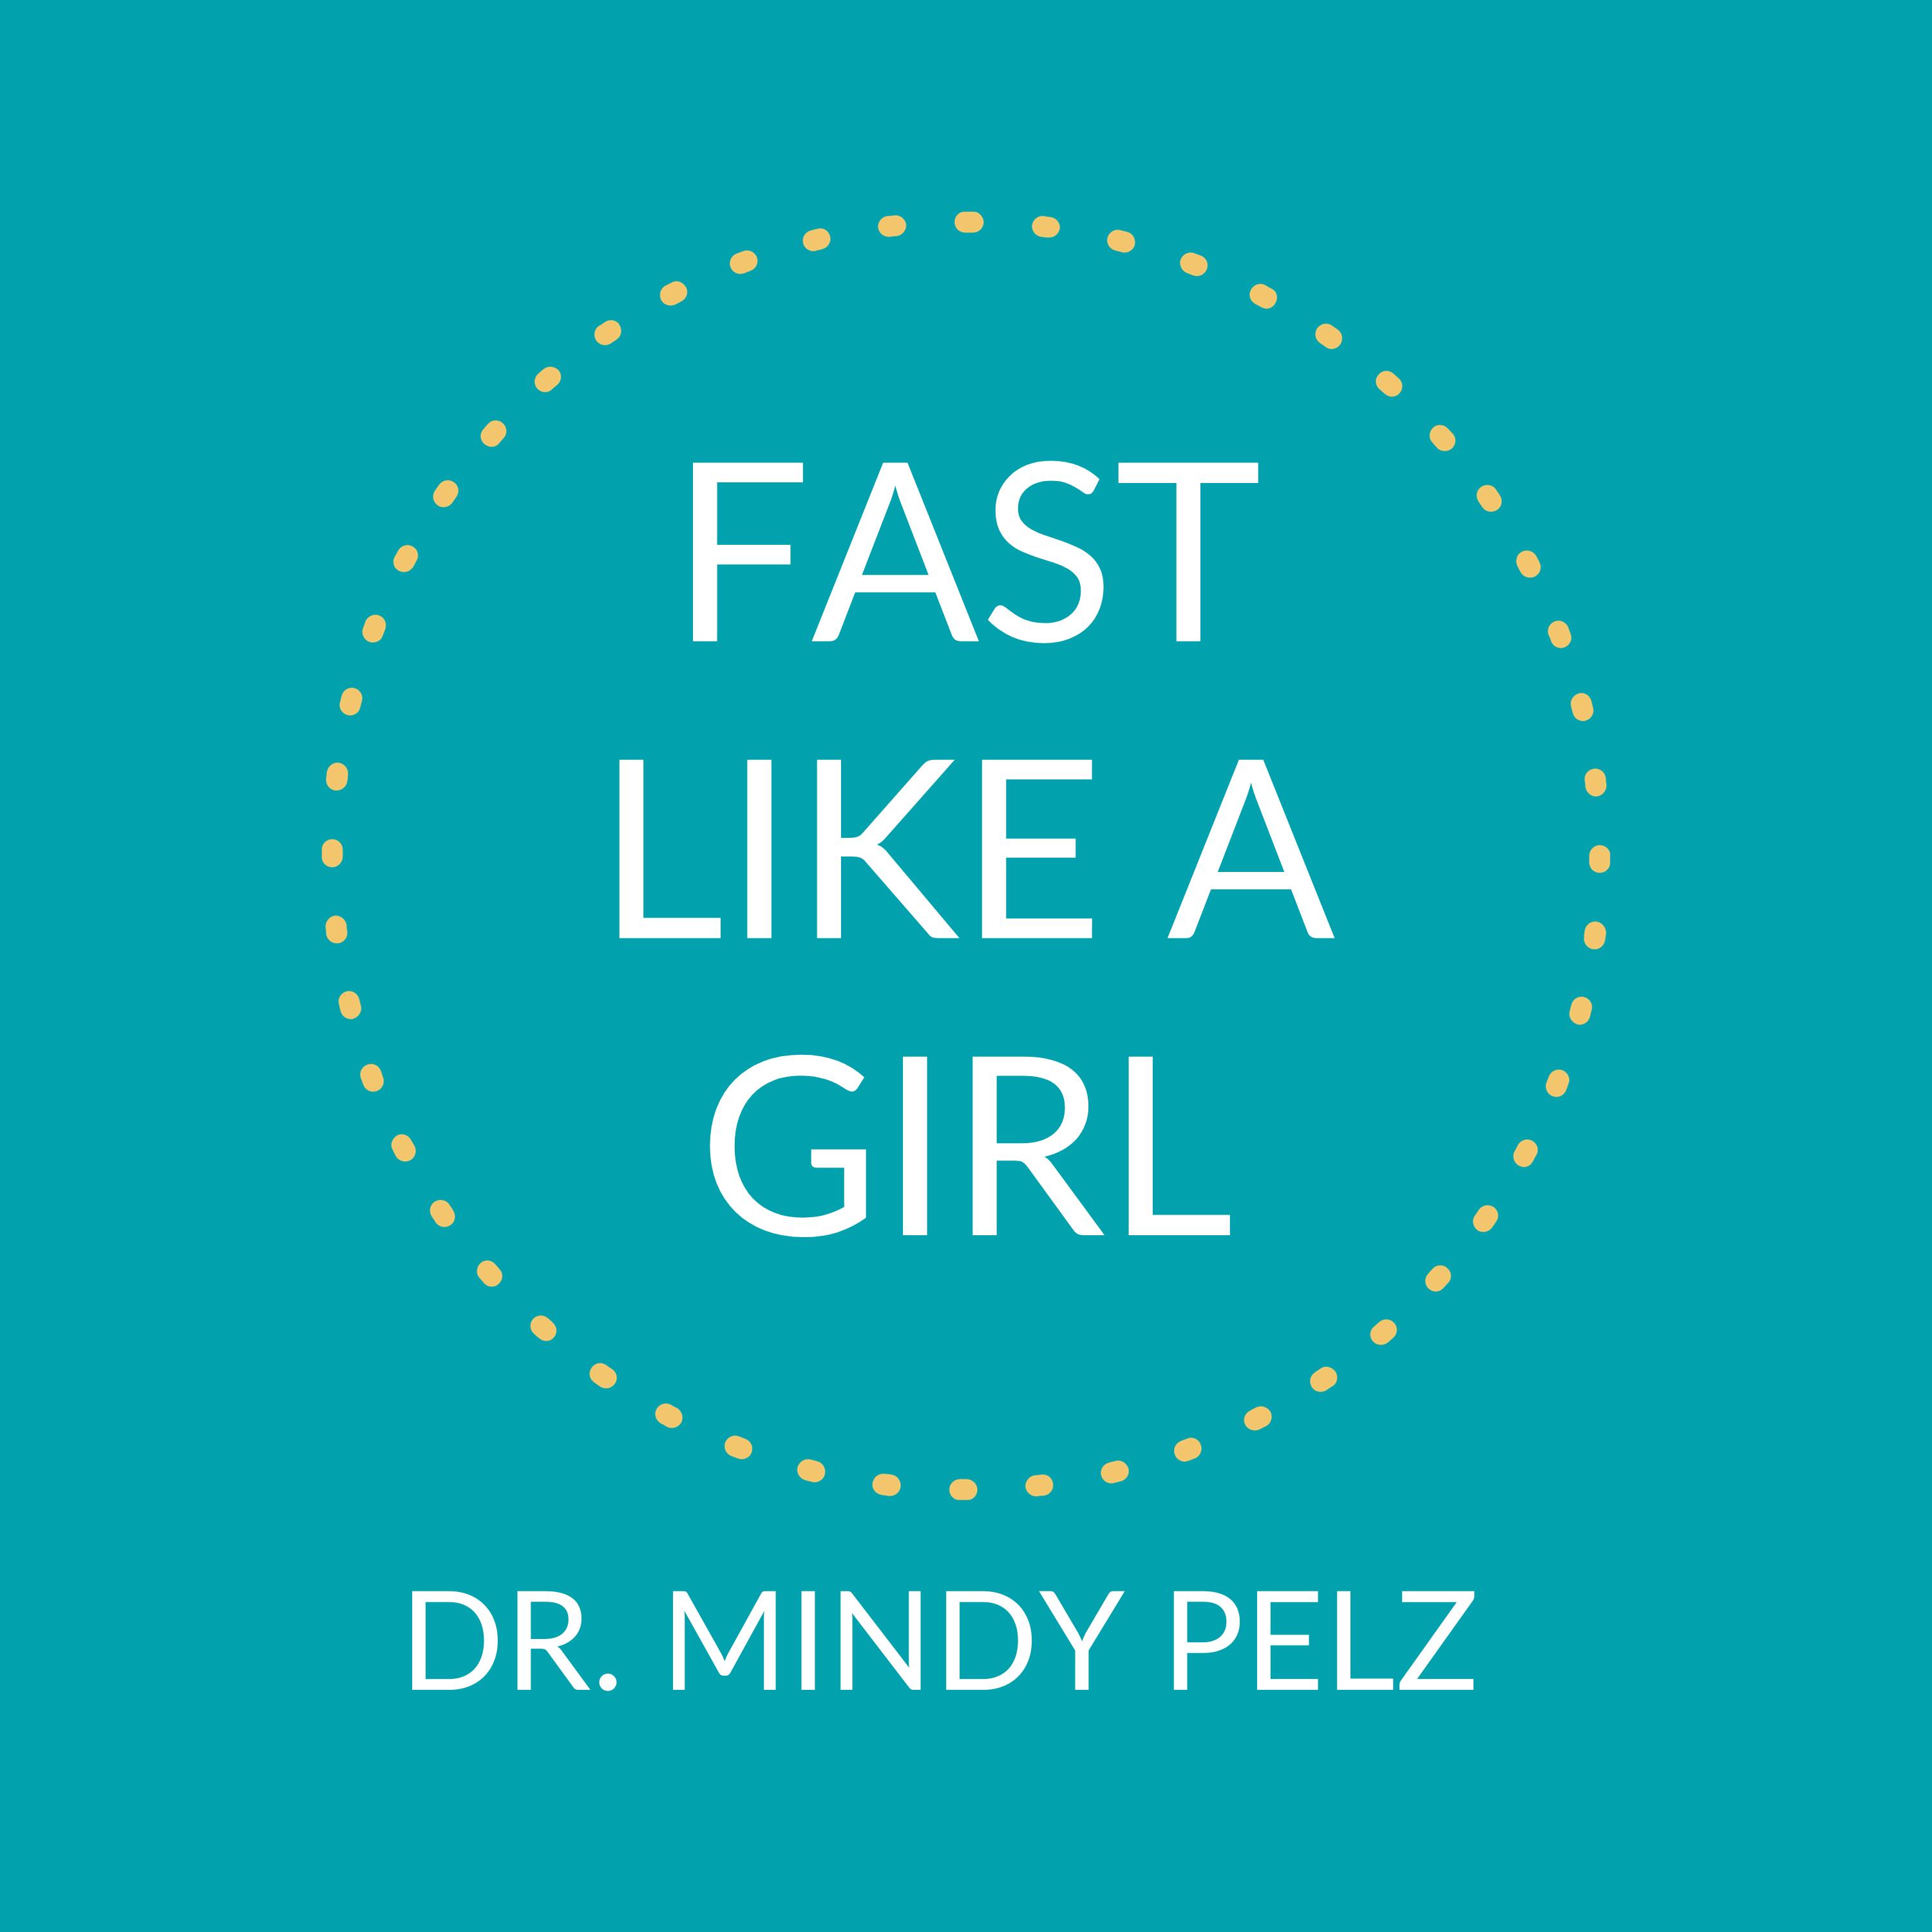 Fast Like a Girl Summary and 30-Day Reset Fasting Schedule - Dr. Mindy Pelz